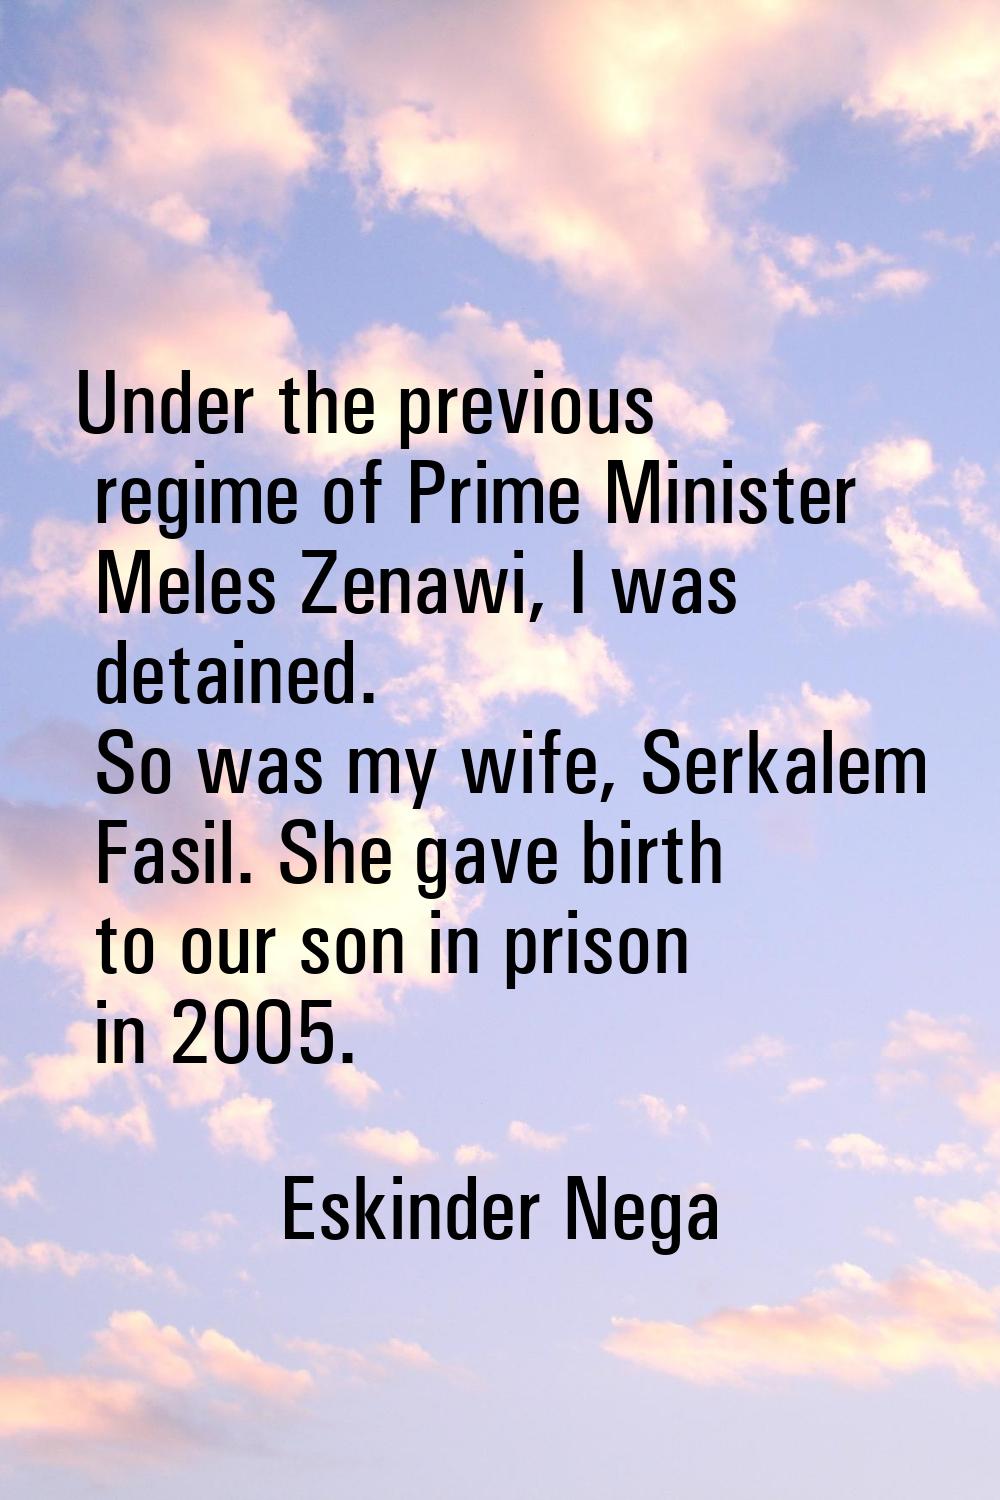 Under the previous regime of Prime Minister Meles Zenawi, I was detained. So was my wife, Serkalem 